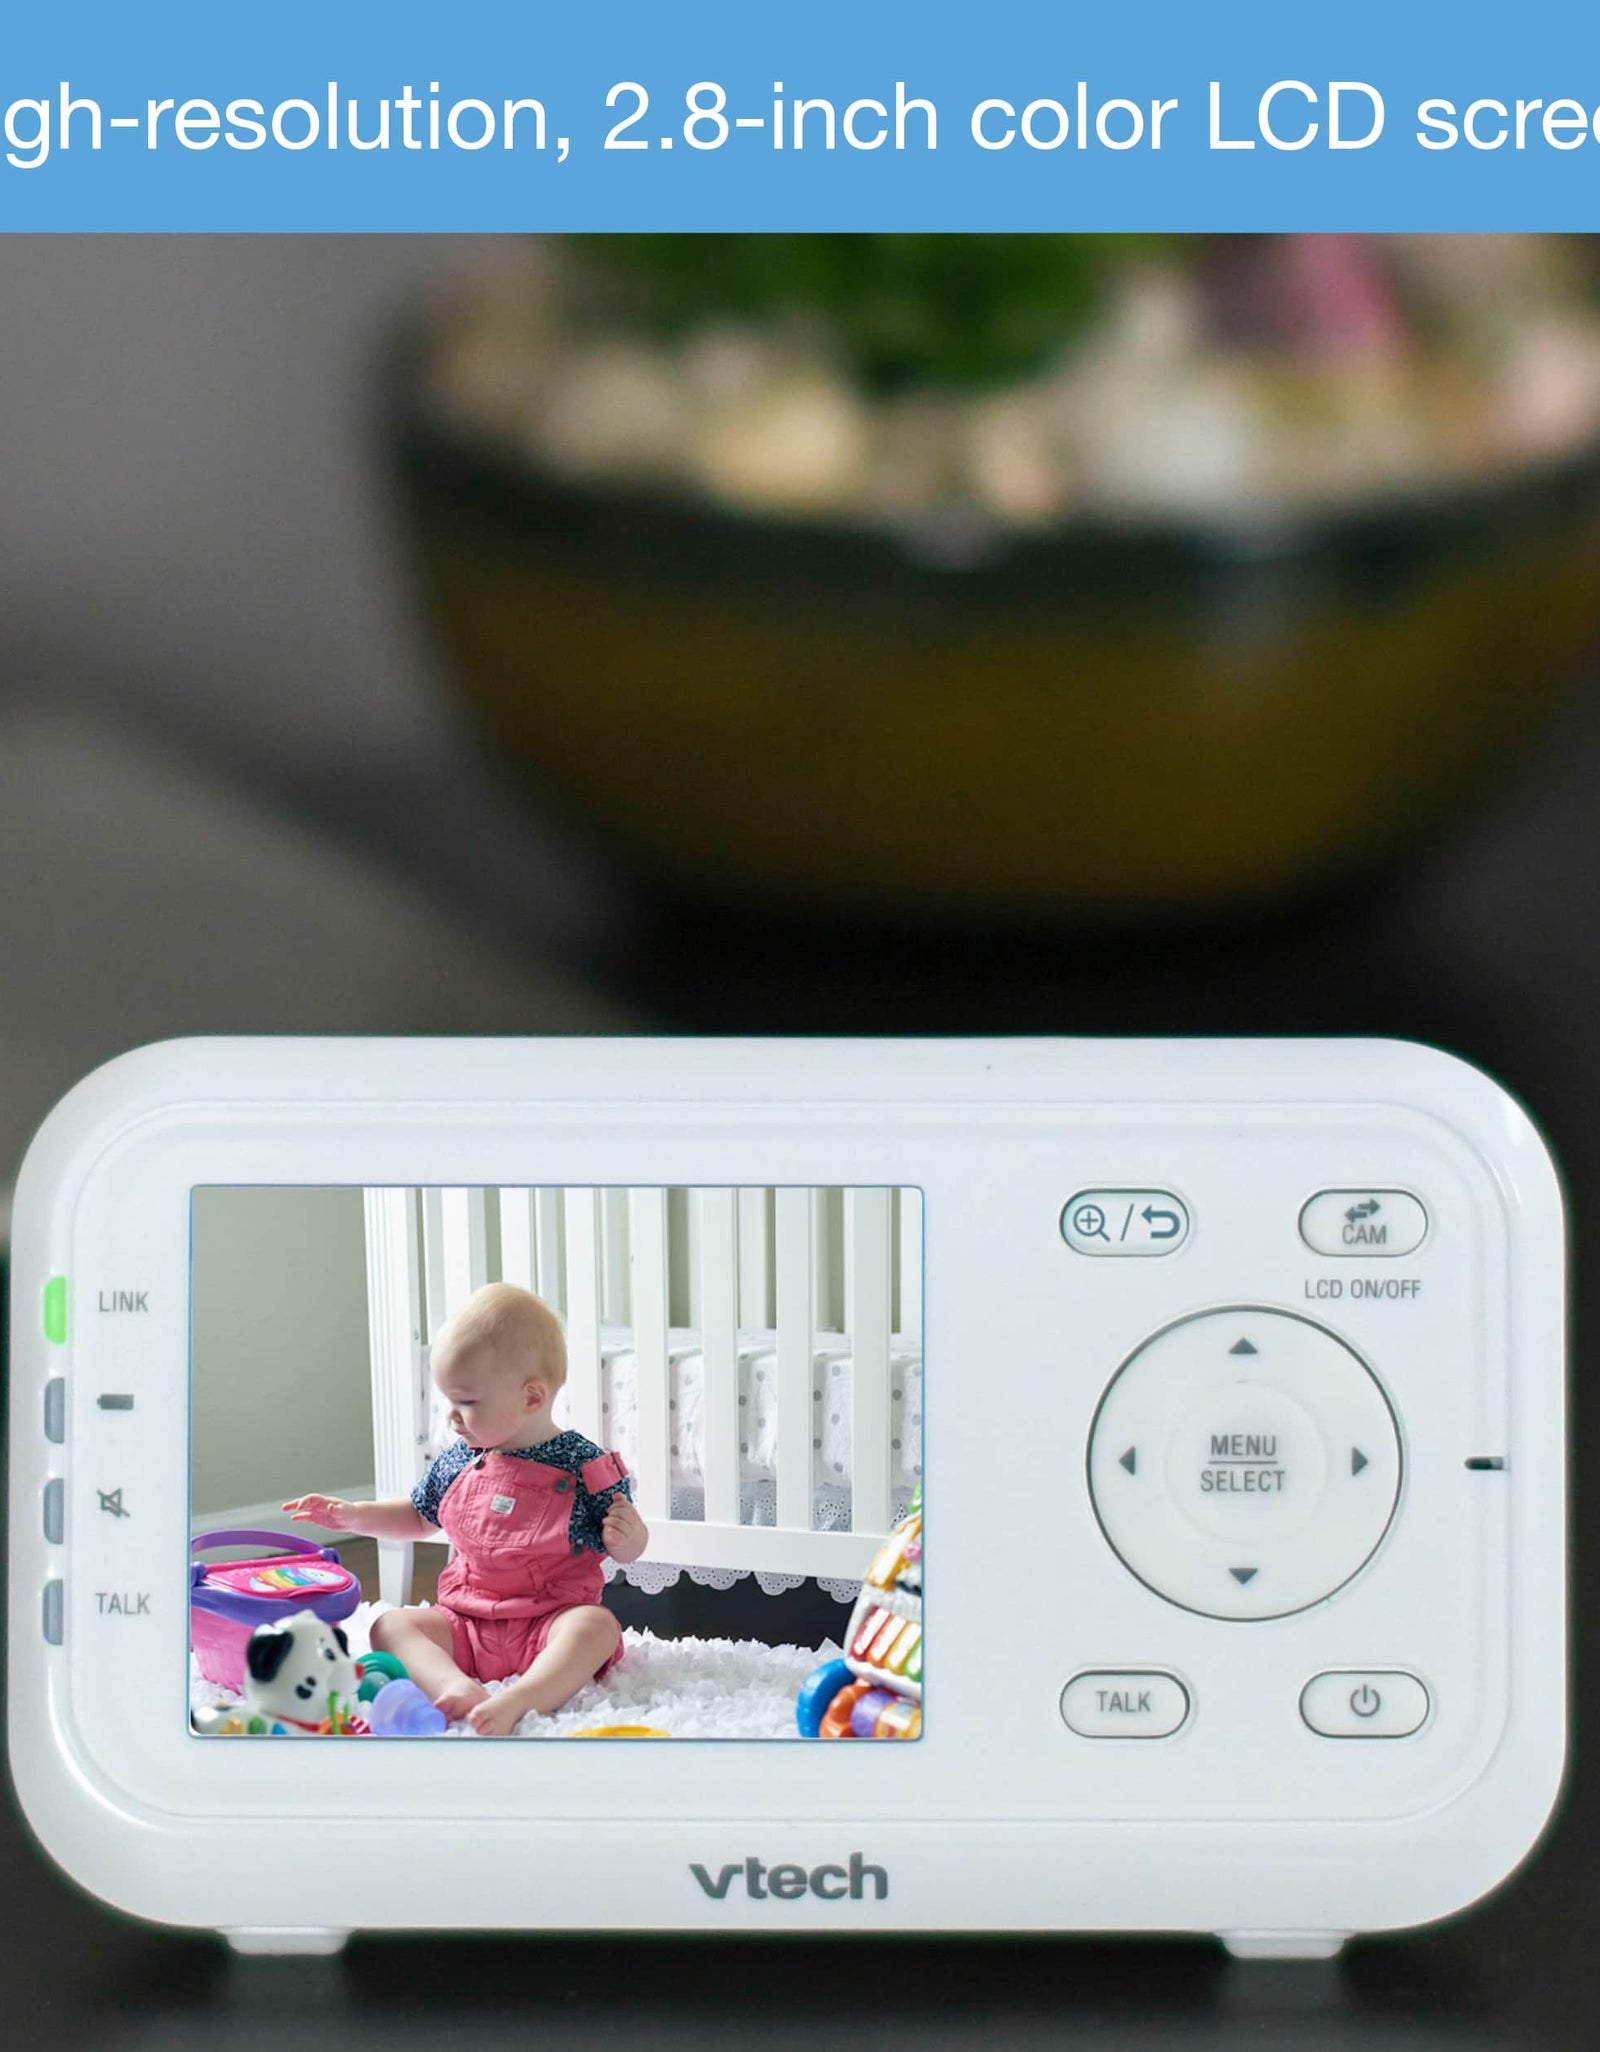 VTech 2.8" Digital Video Baby Monitor with Full-Color and Automatic Night Vision